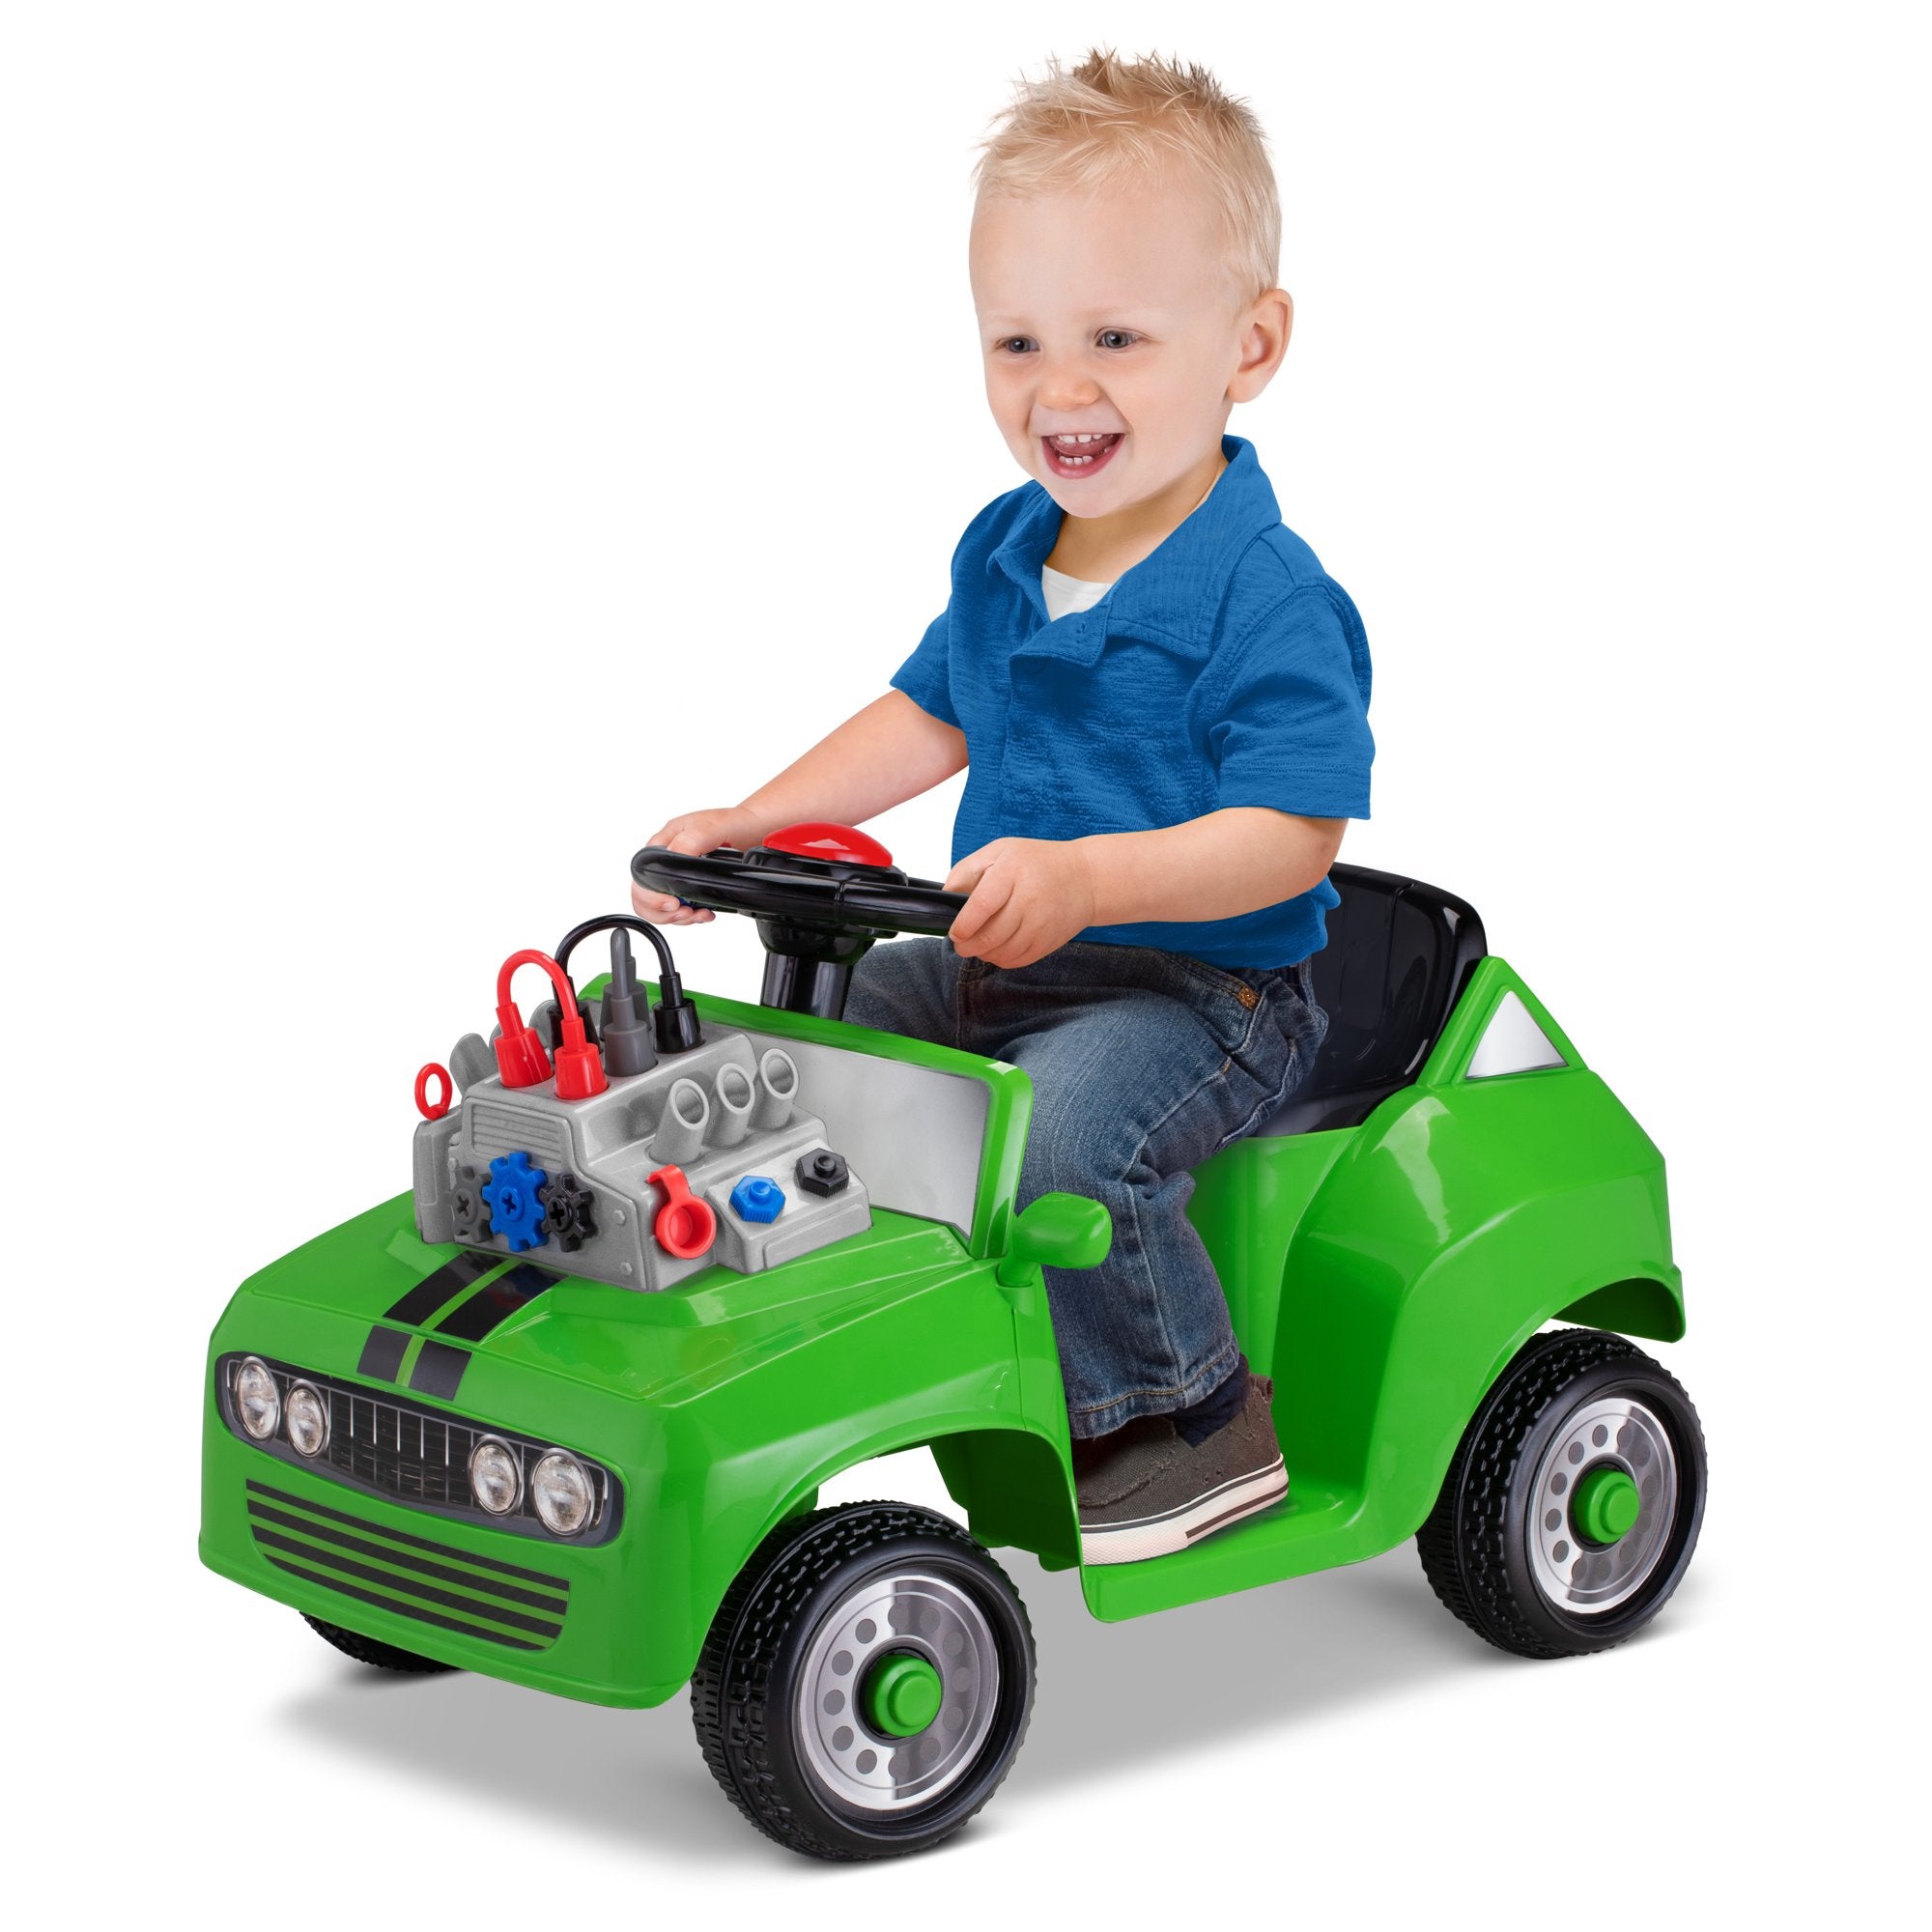 Fix & Ride Car Toddler Ride-On Kids Fun Toy for Boys, Green-Ride On Toys & Accessories-AULEY